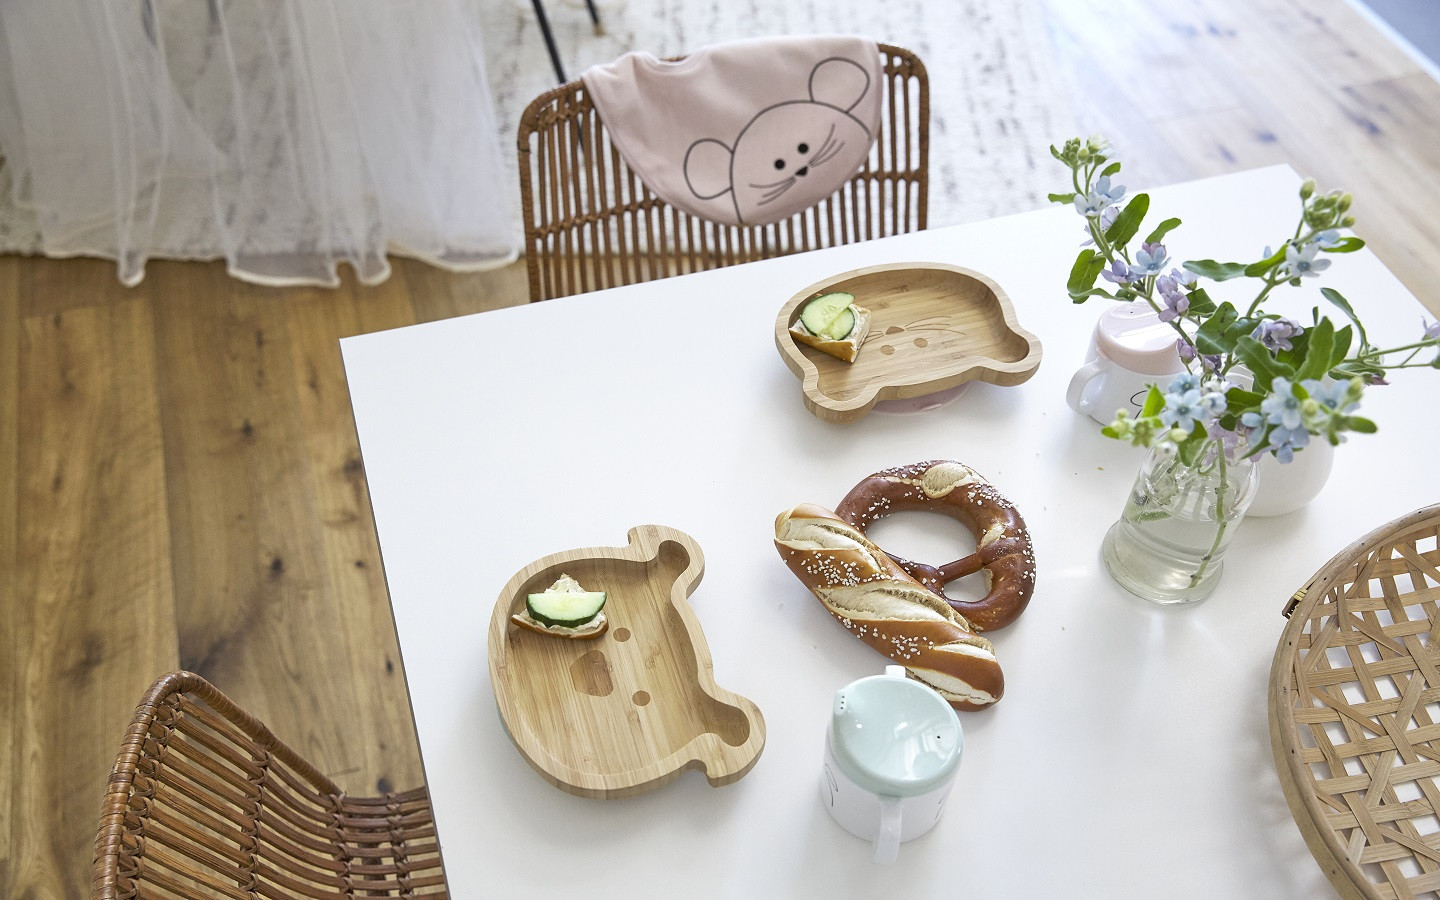 Snack plates made of bamboo